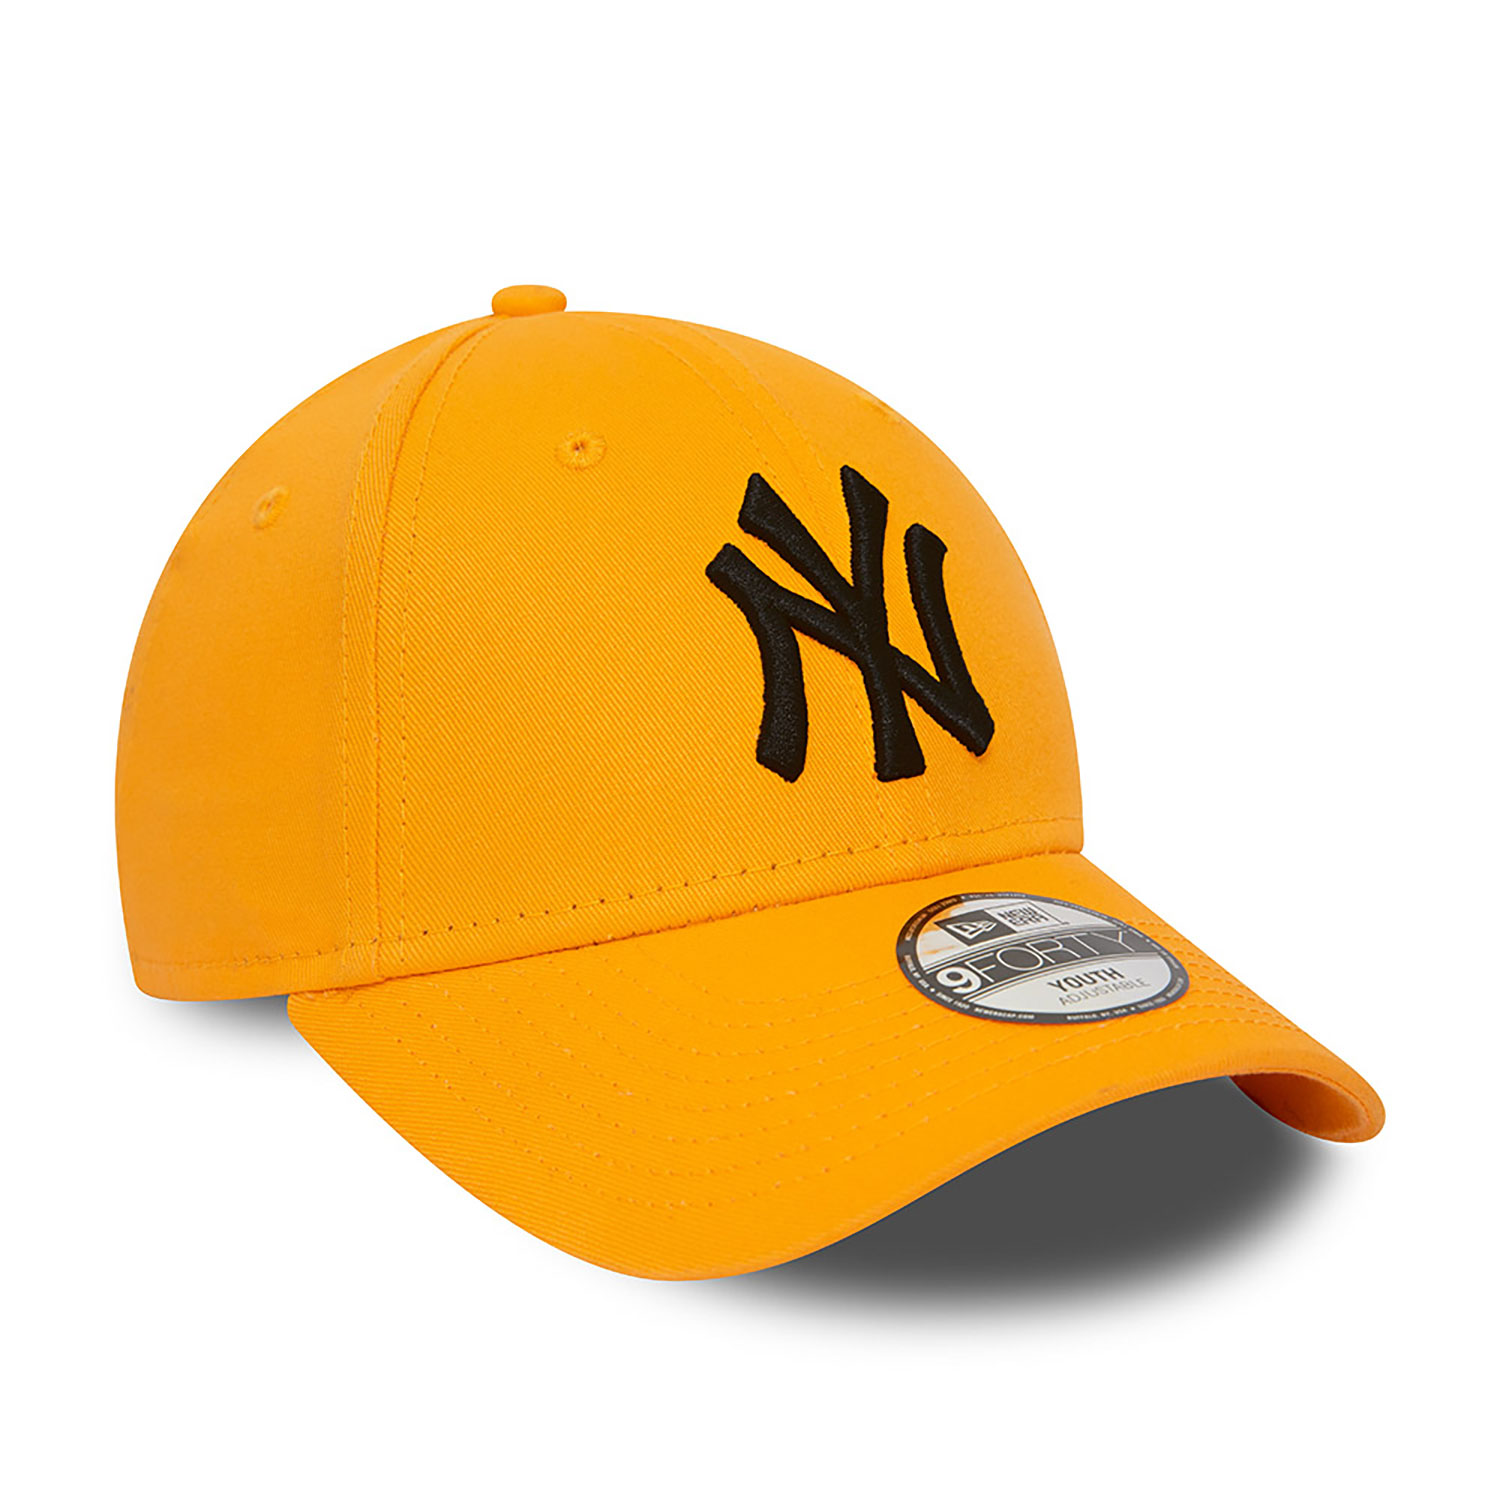 New York Yankees Youth League Essential Papaya Smoothie 9FORTY Adjustable Cap